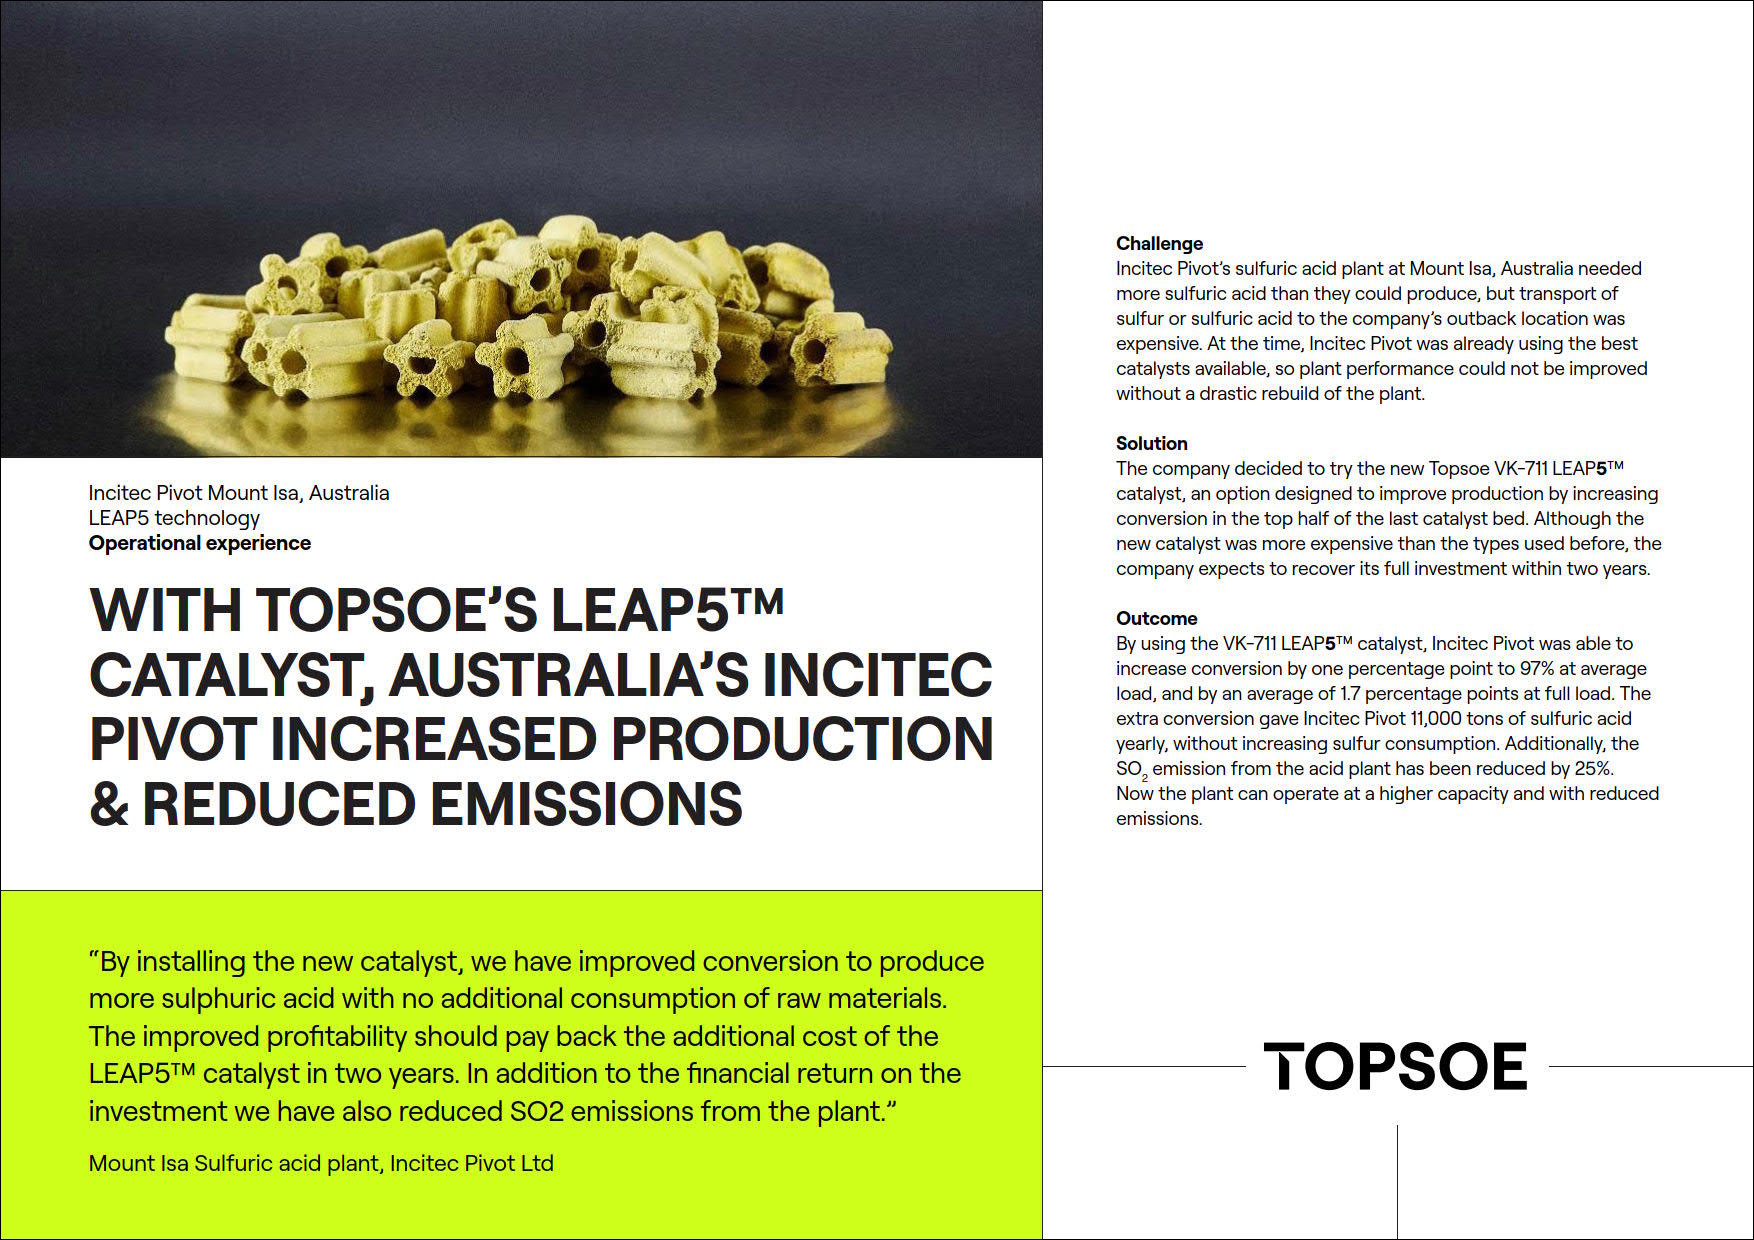 With Topsoe's Leap5™ catalyst, Australia's Incitec Pivot increased production & reduced emissions